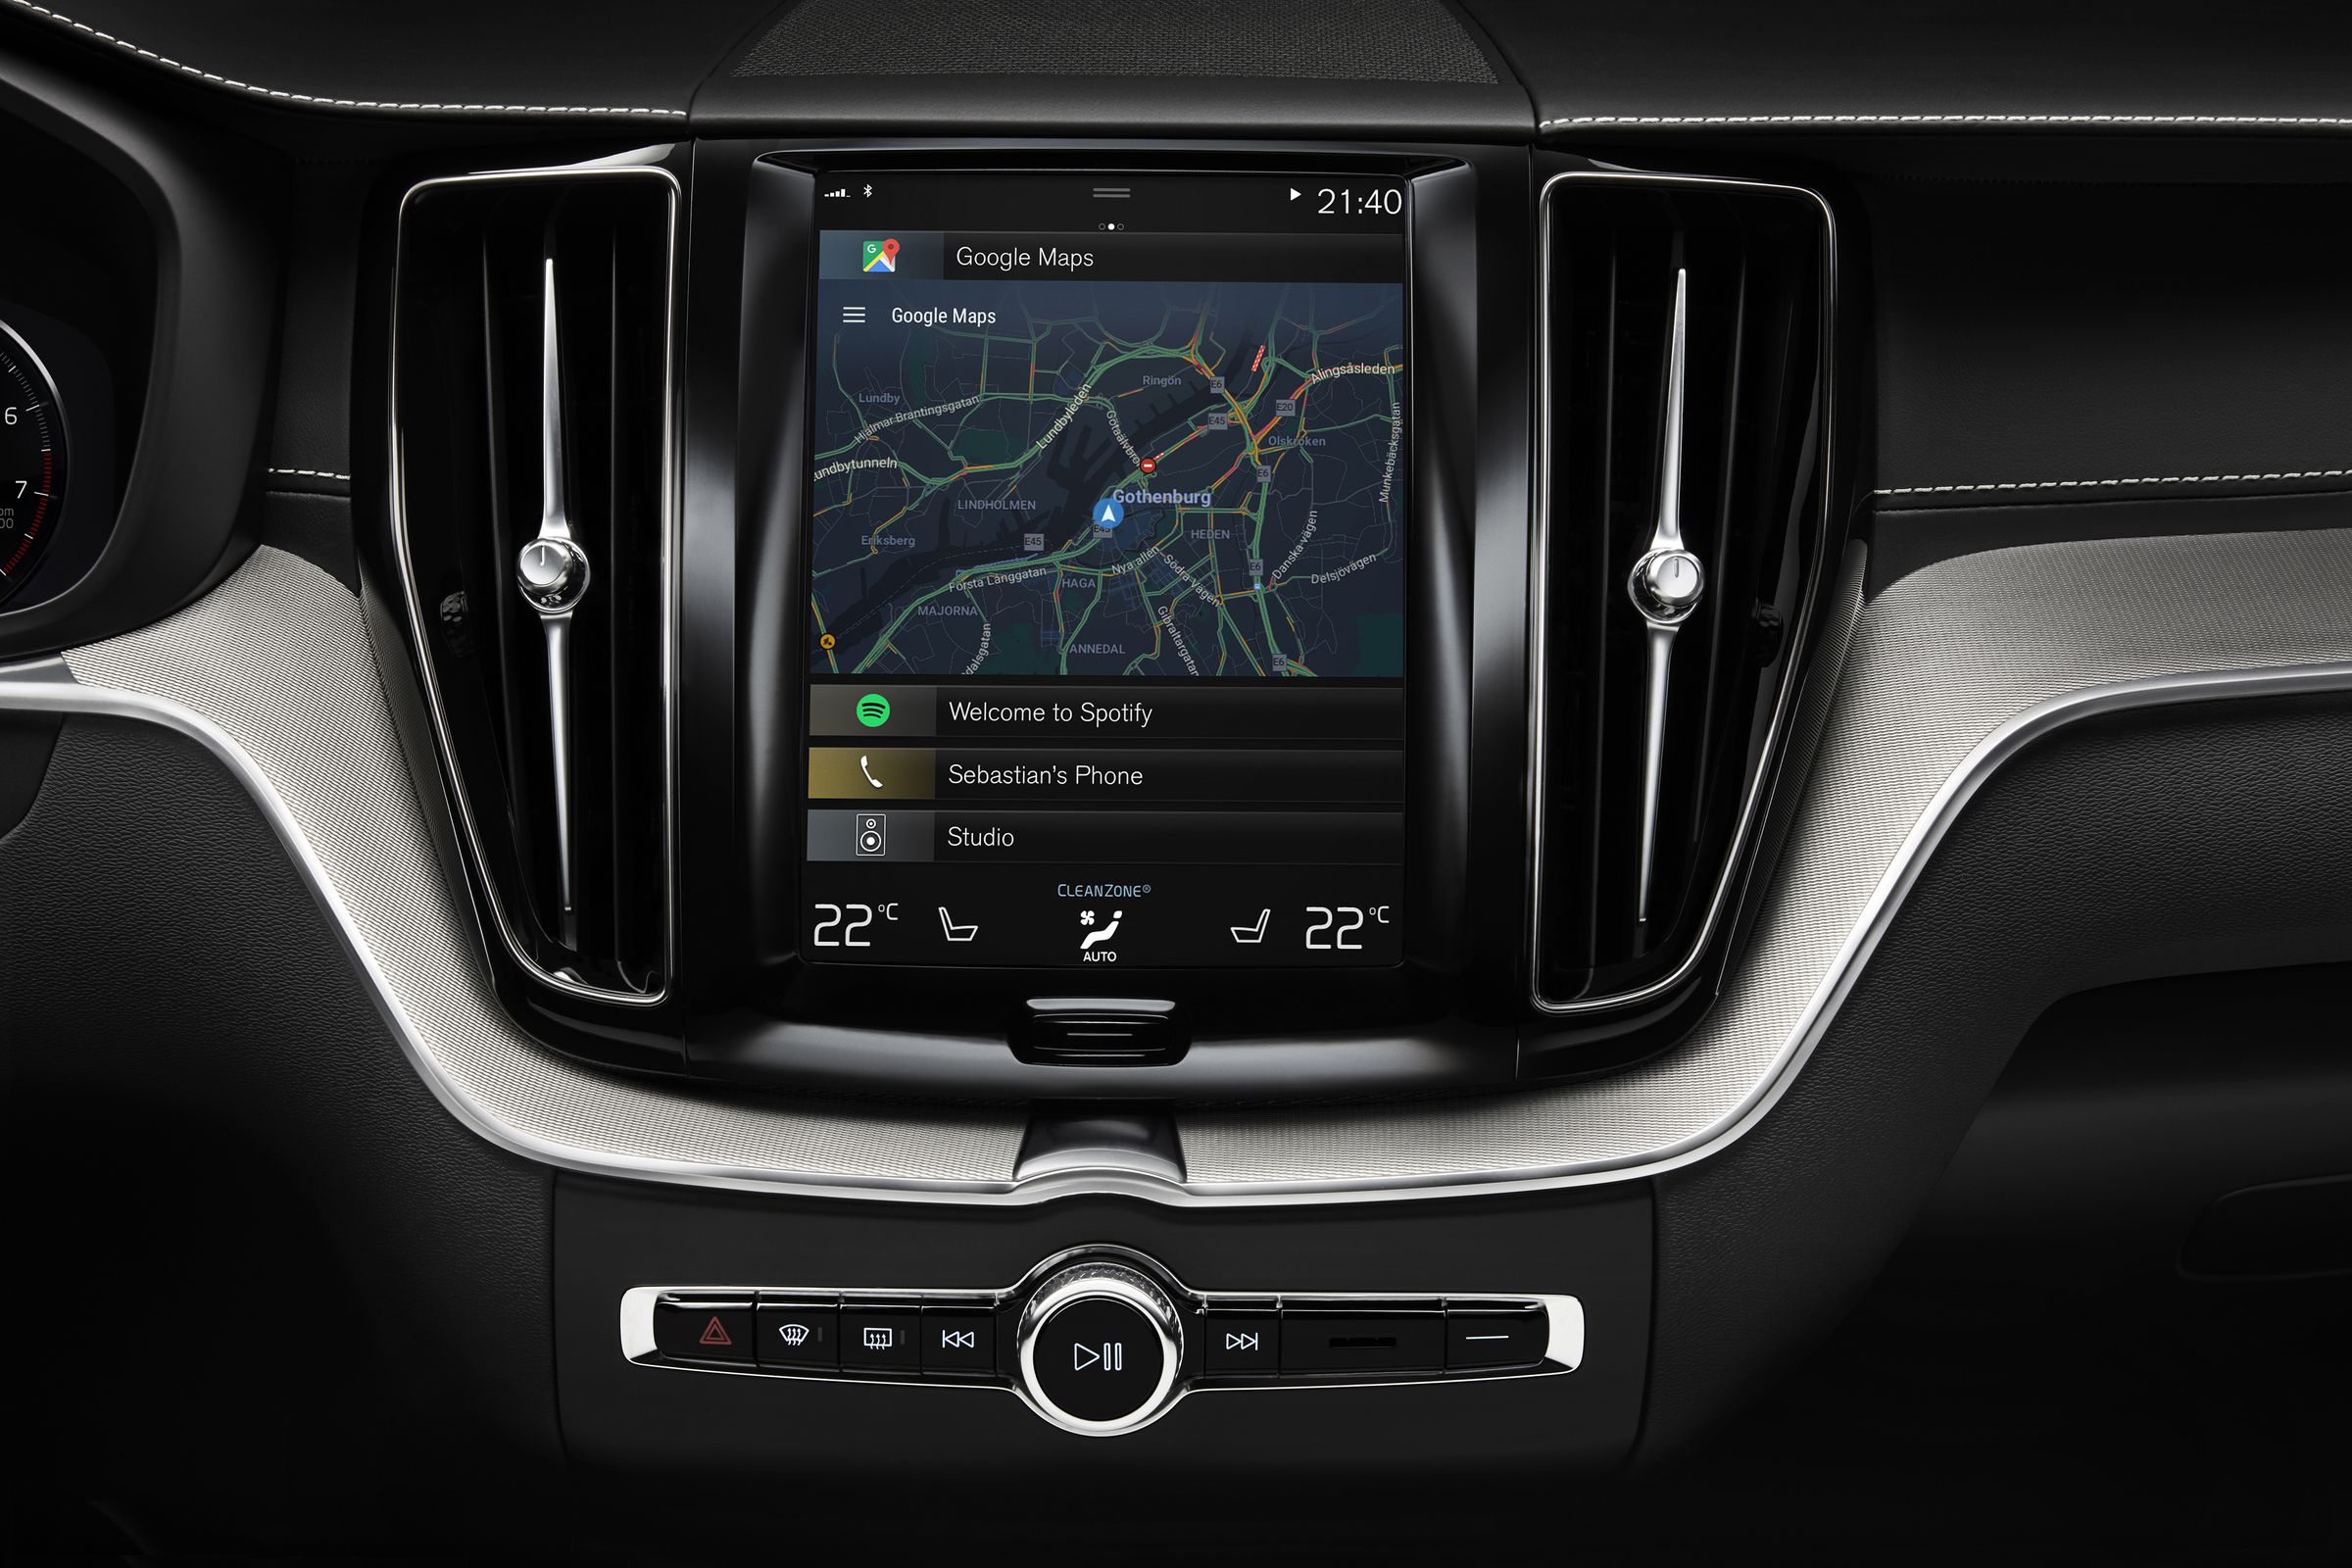 Volvo’s spin on an Android-based infotainment system